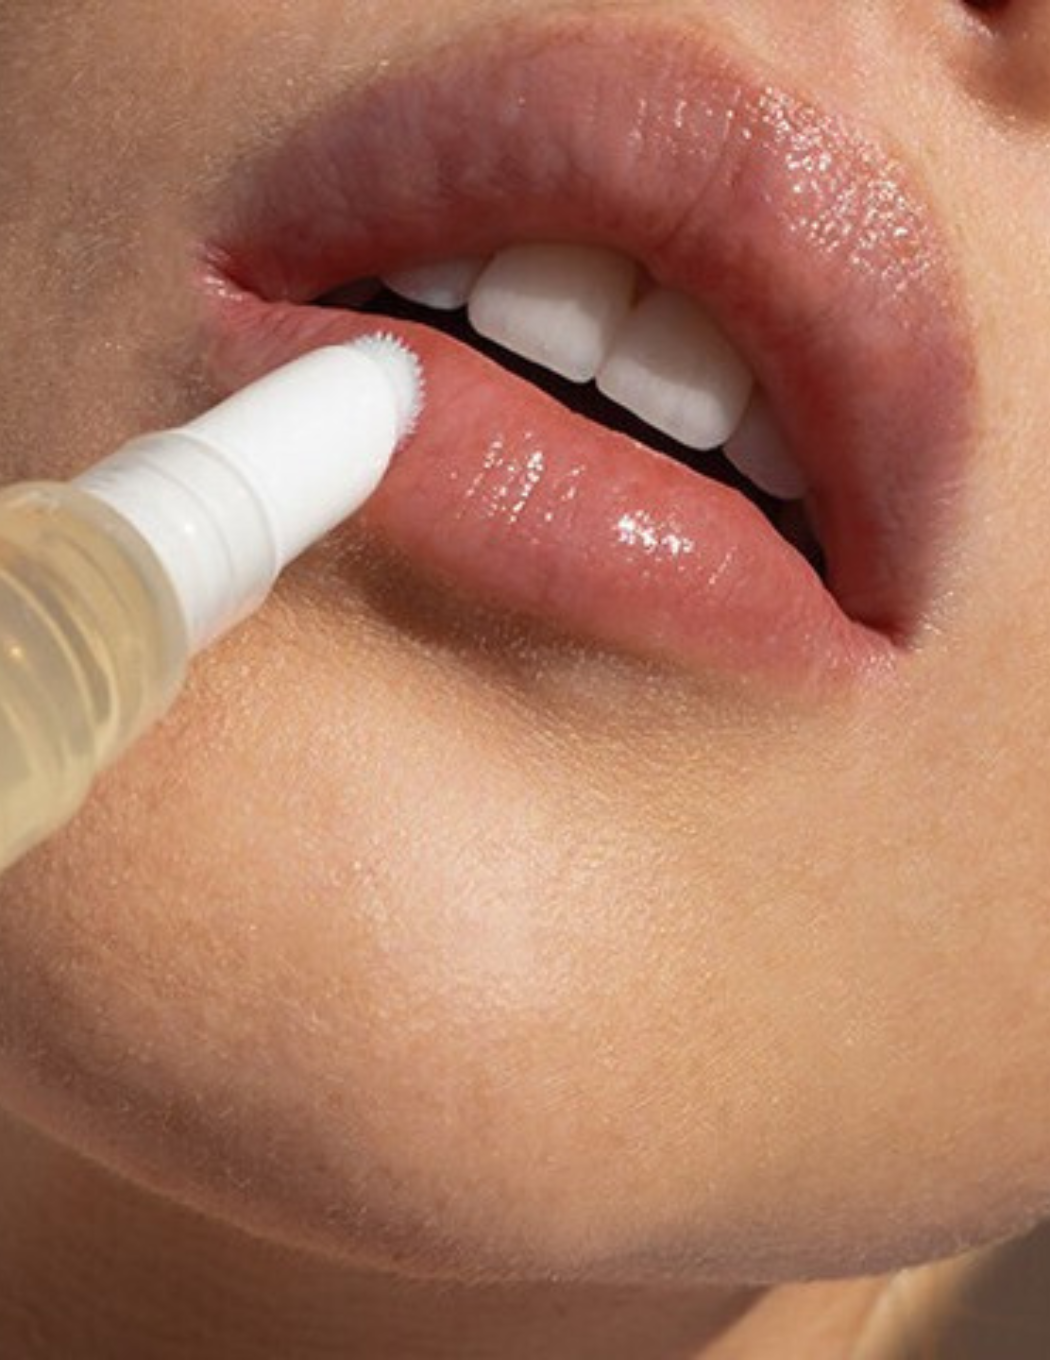 How to get rid of dry, chapped lips